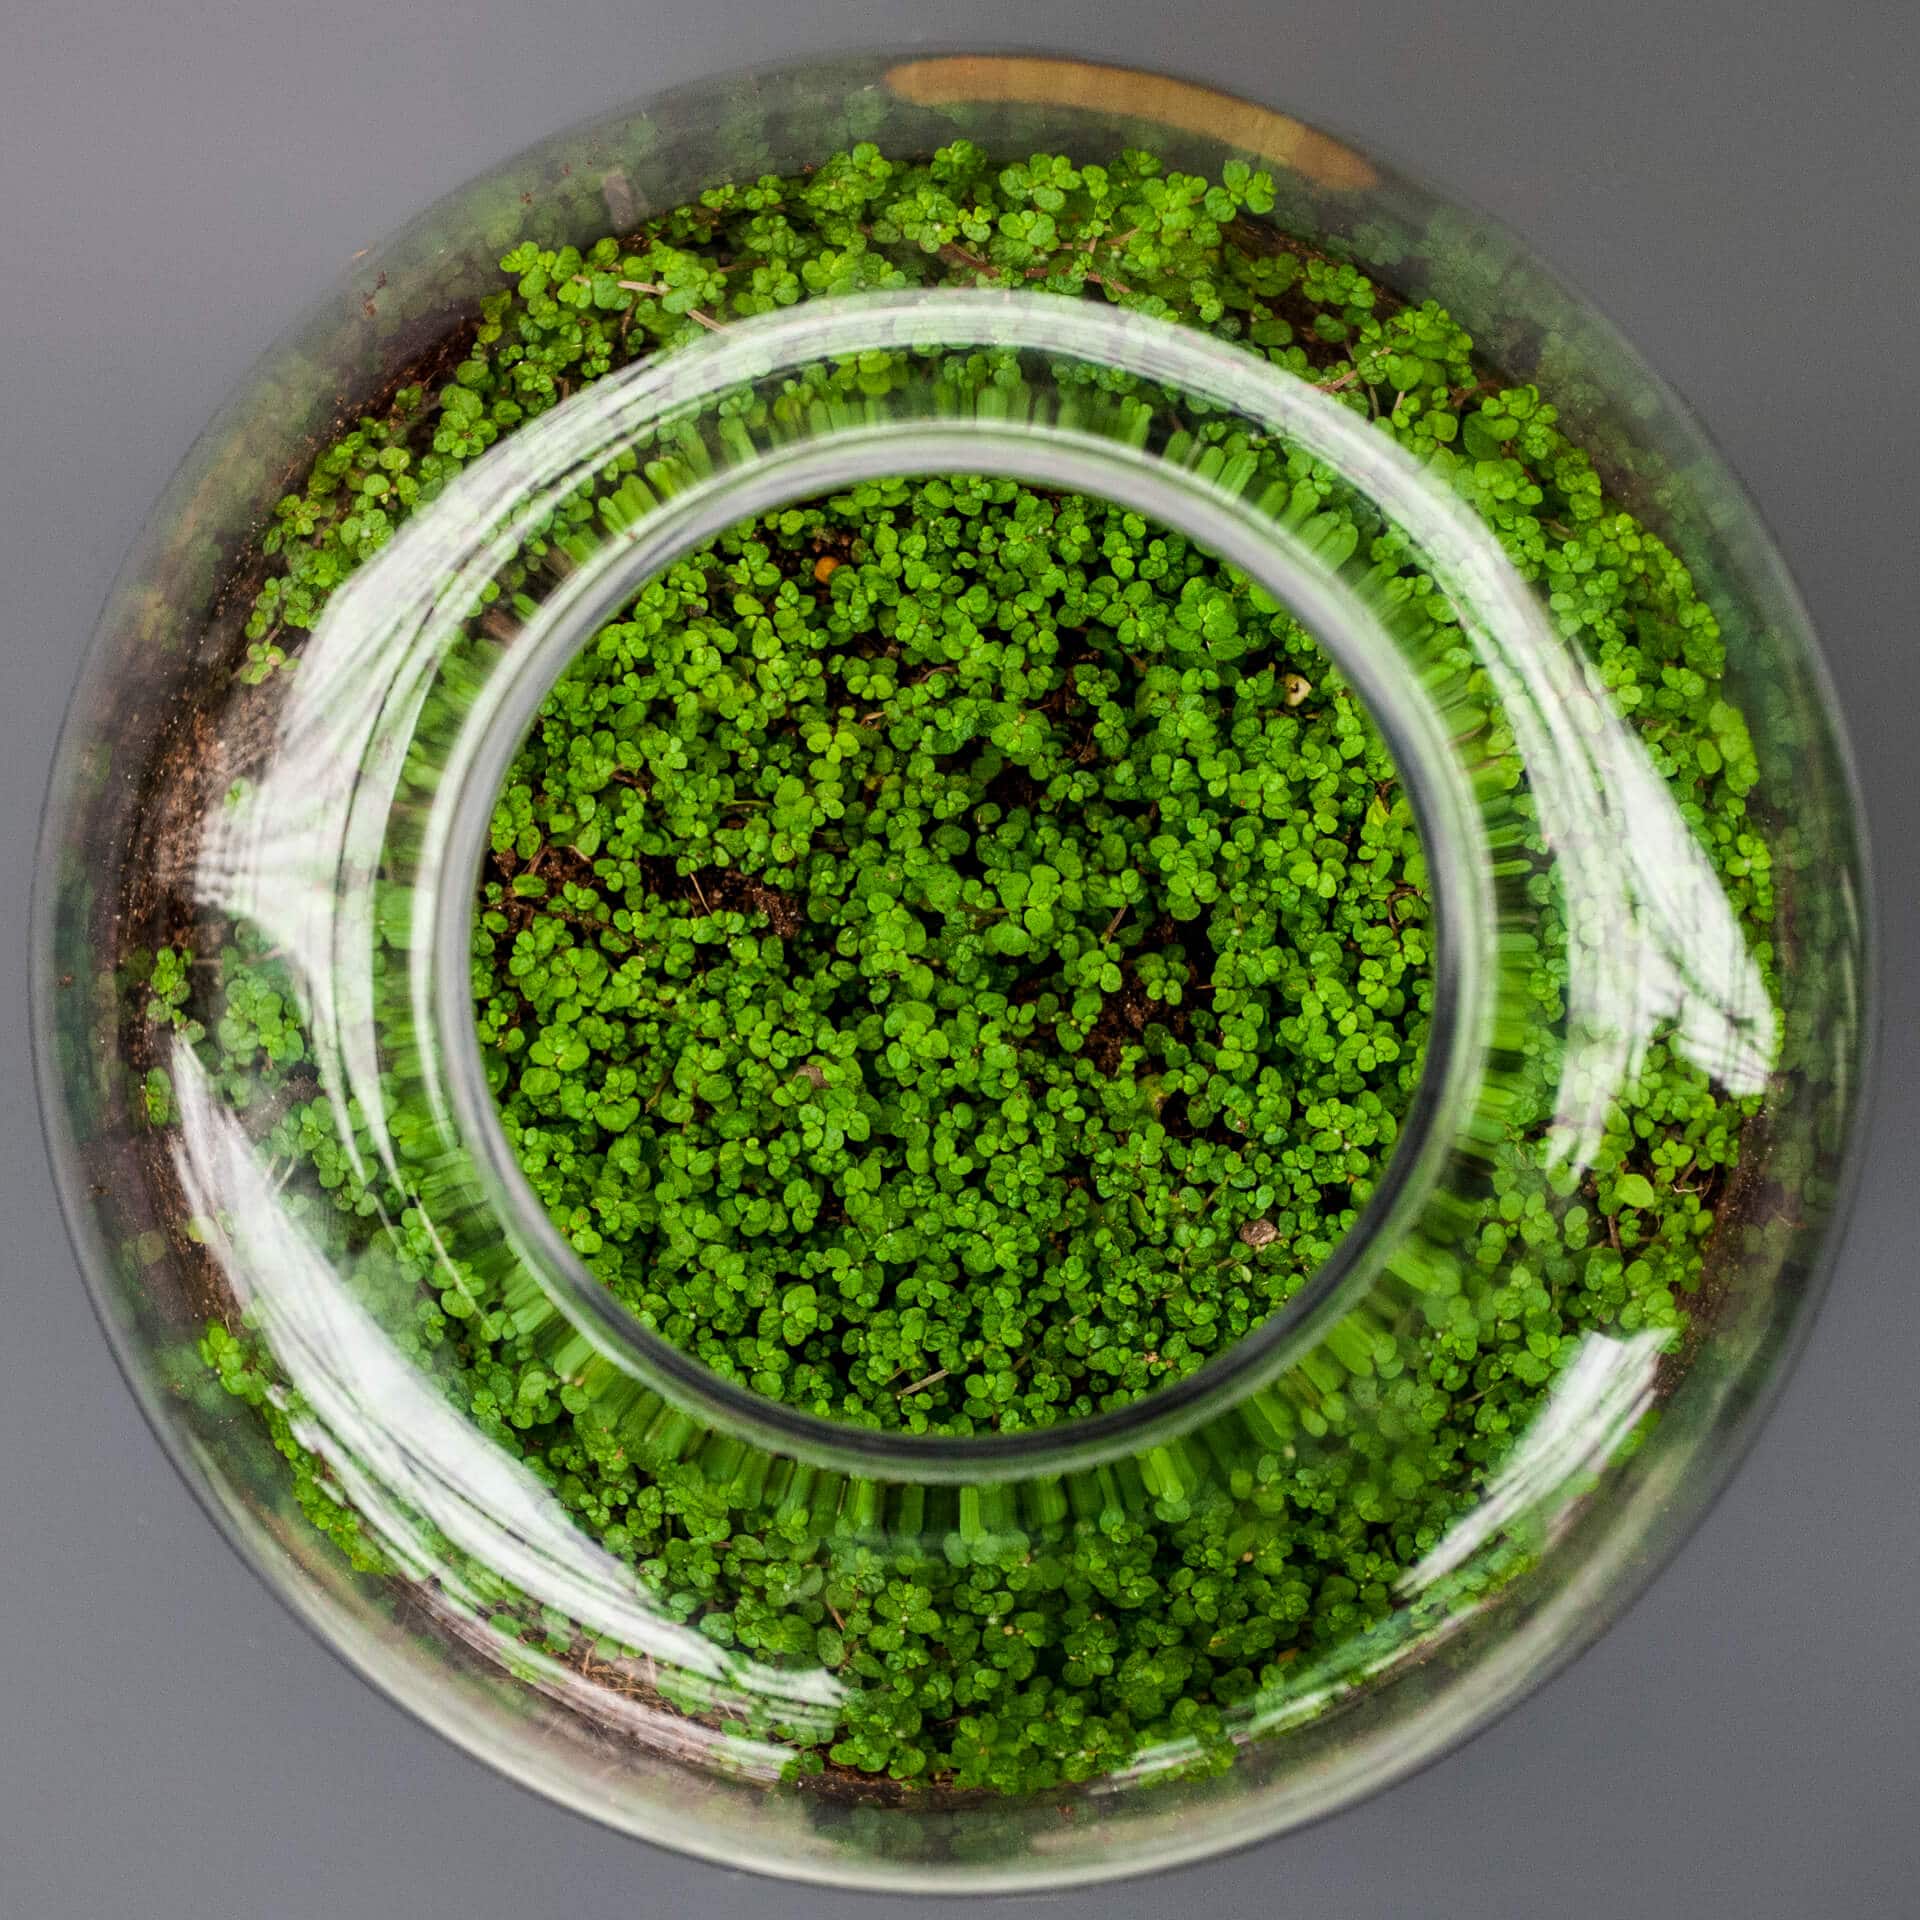 Overhead view of a glass bowl filled with vibrant green terrarium plants.